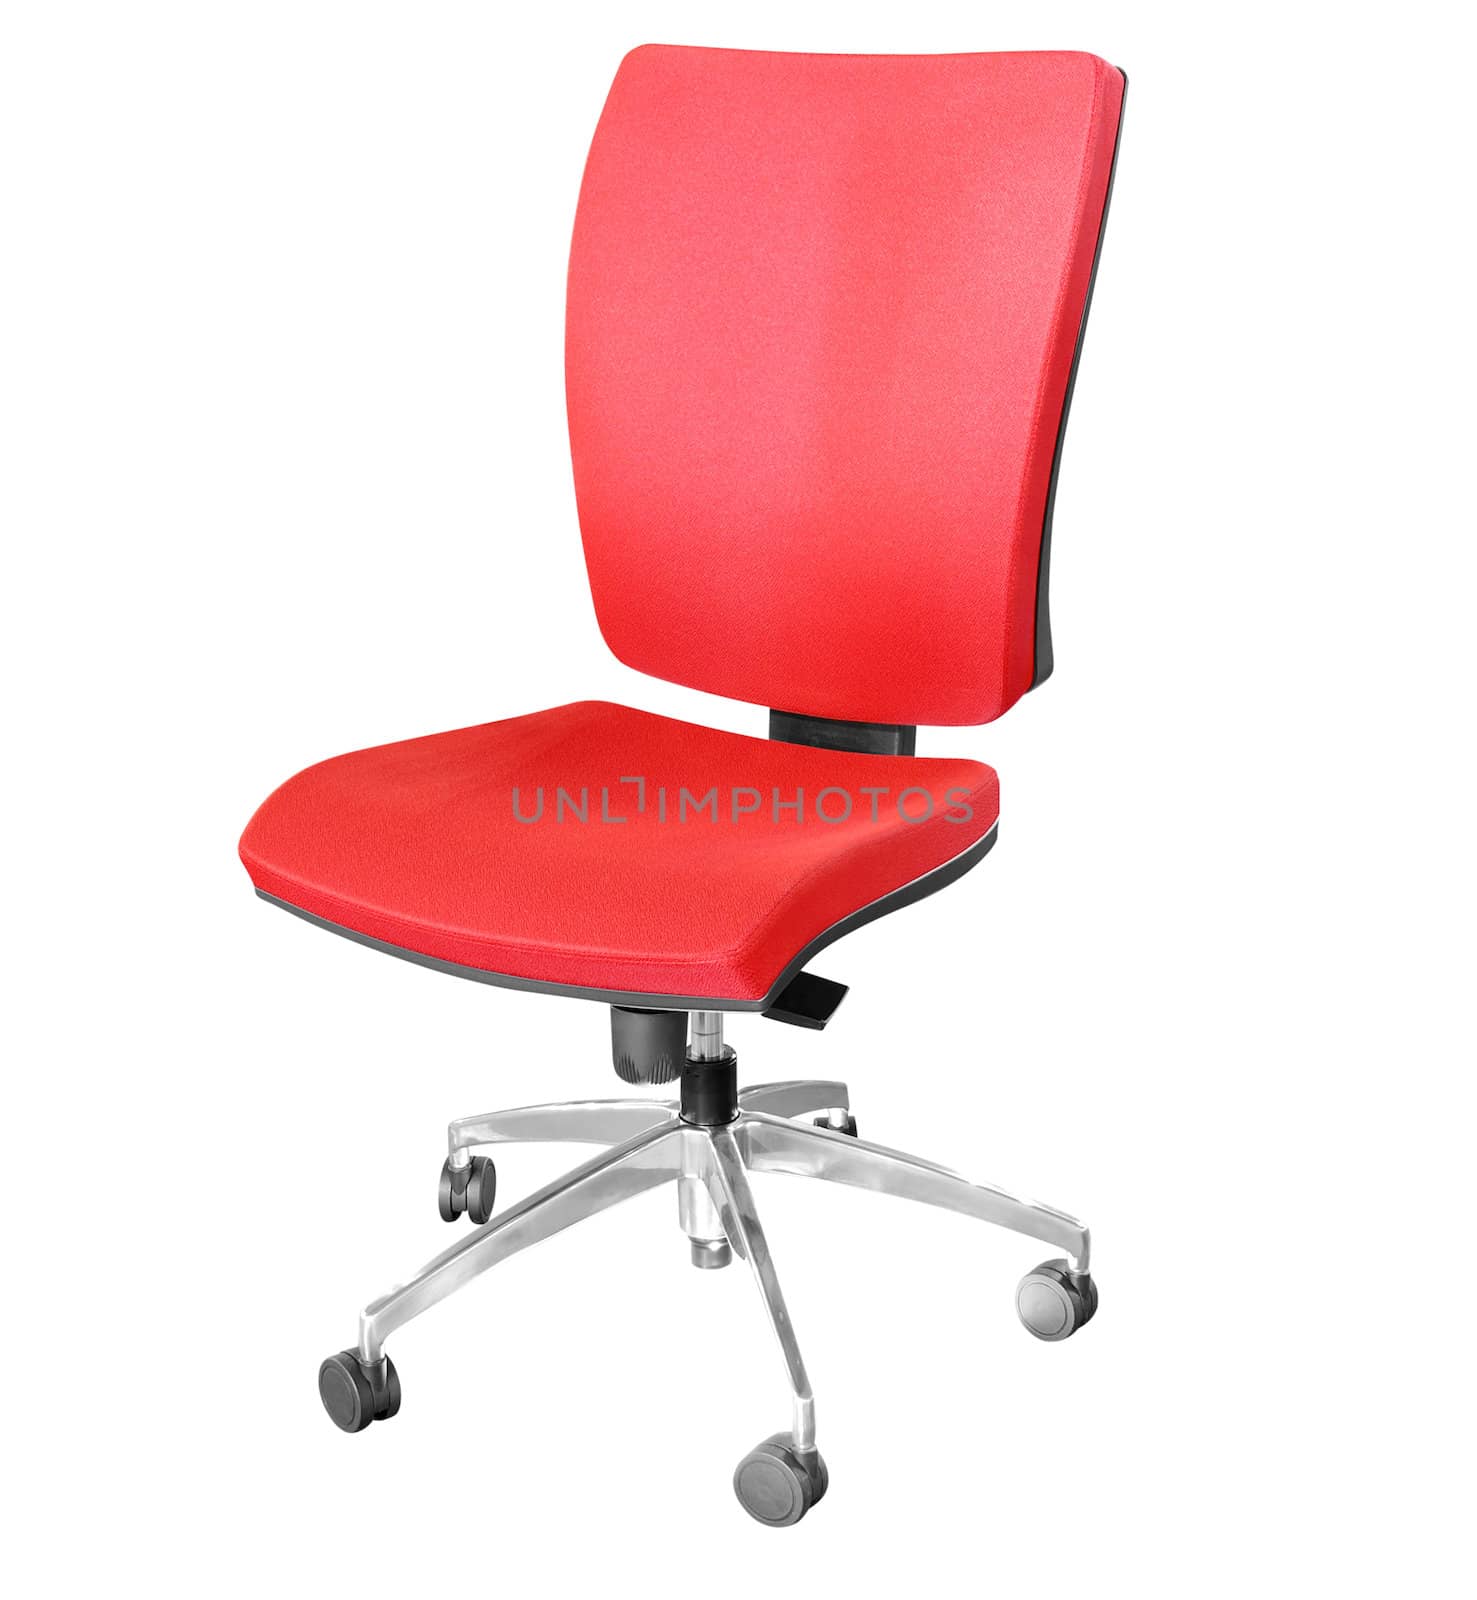 Office red chair isolated on white